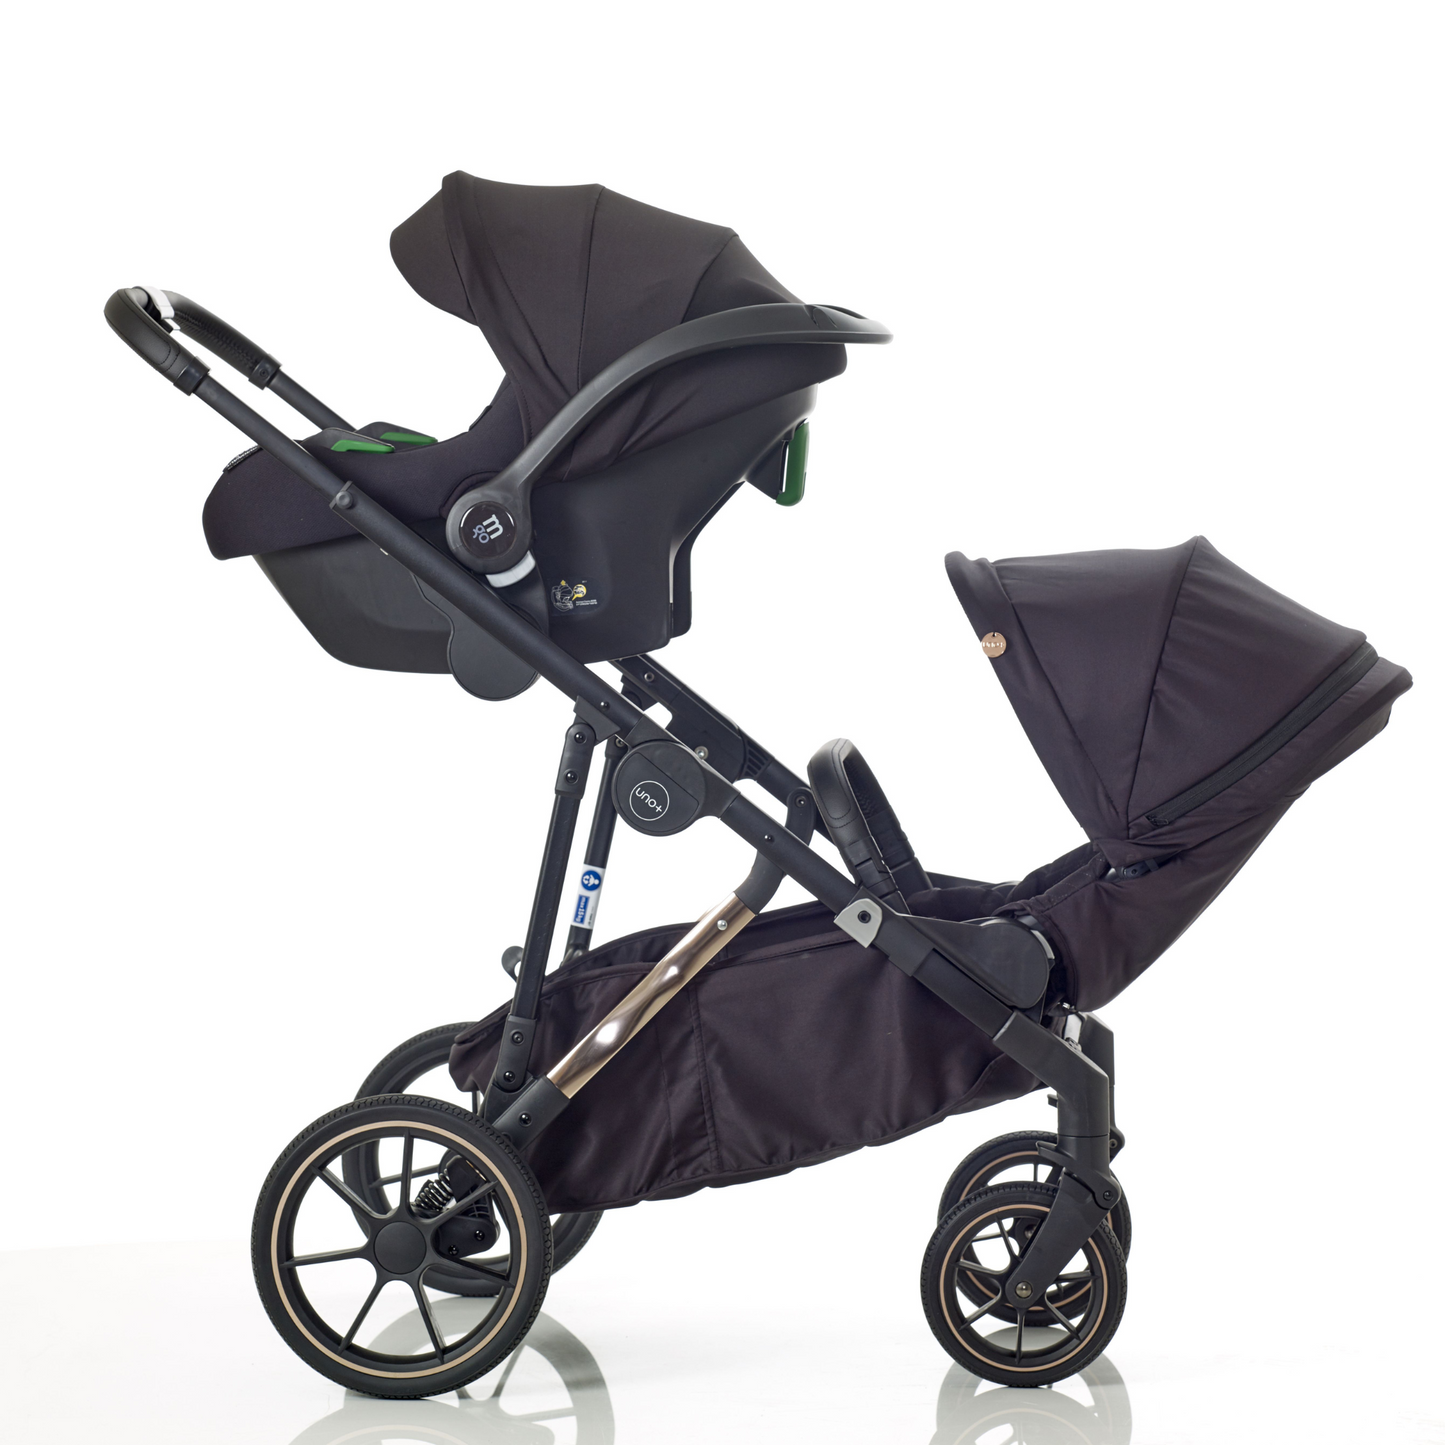 Mee-go UNO+ Travel System